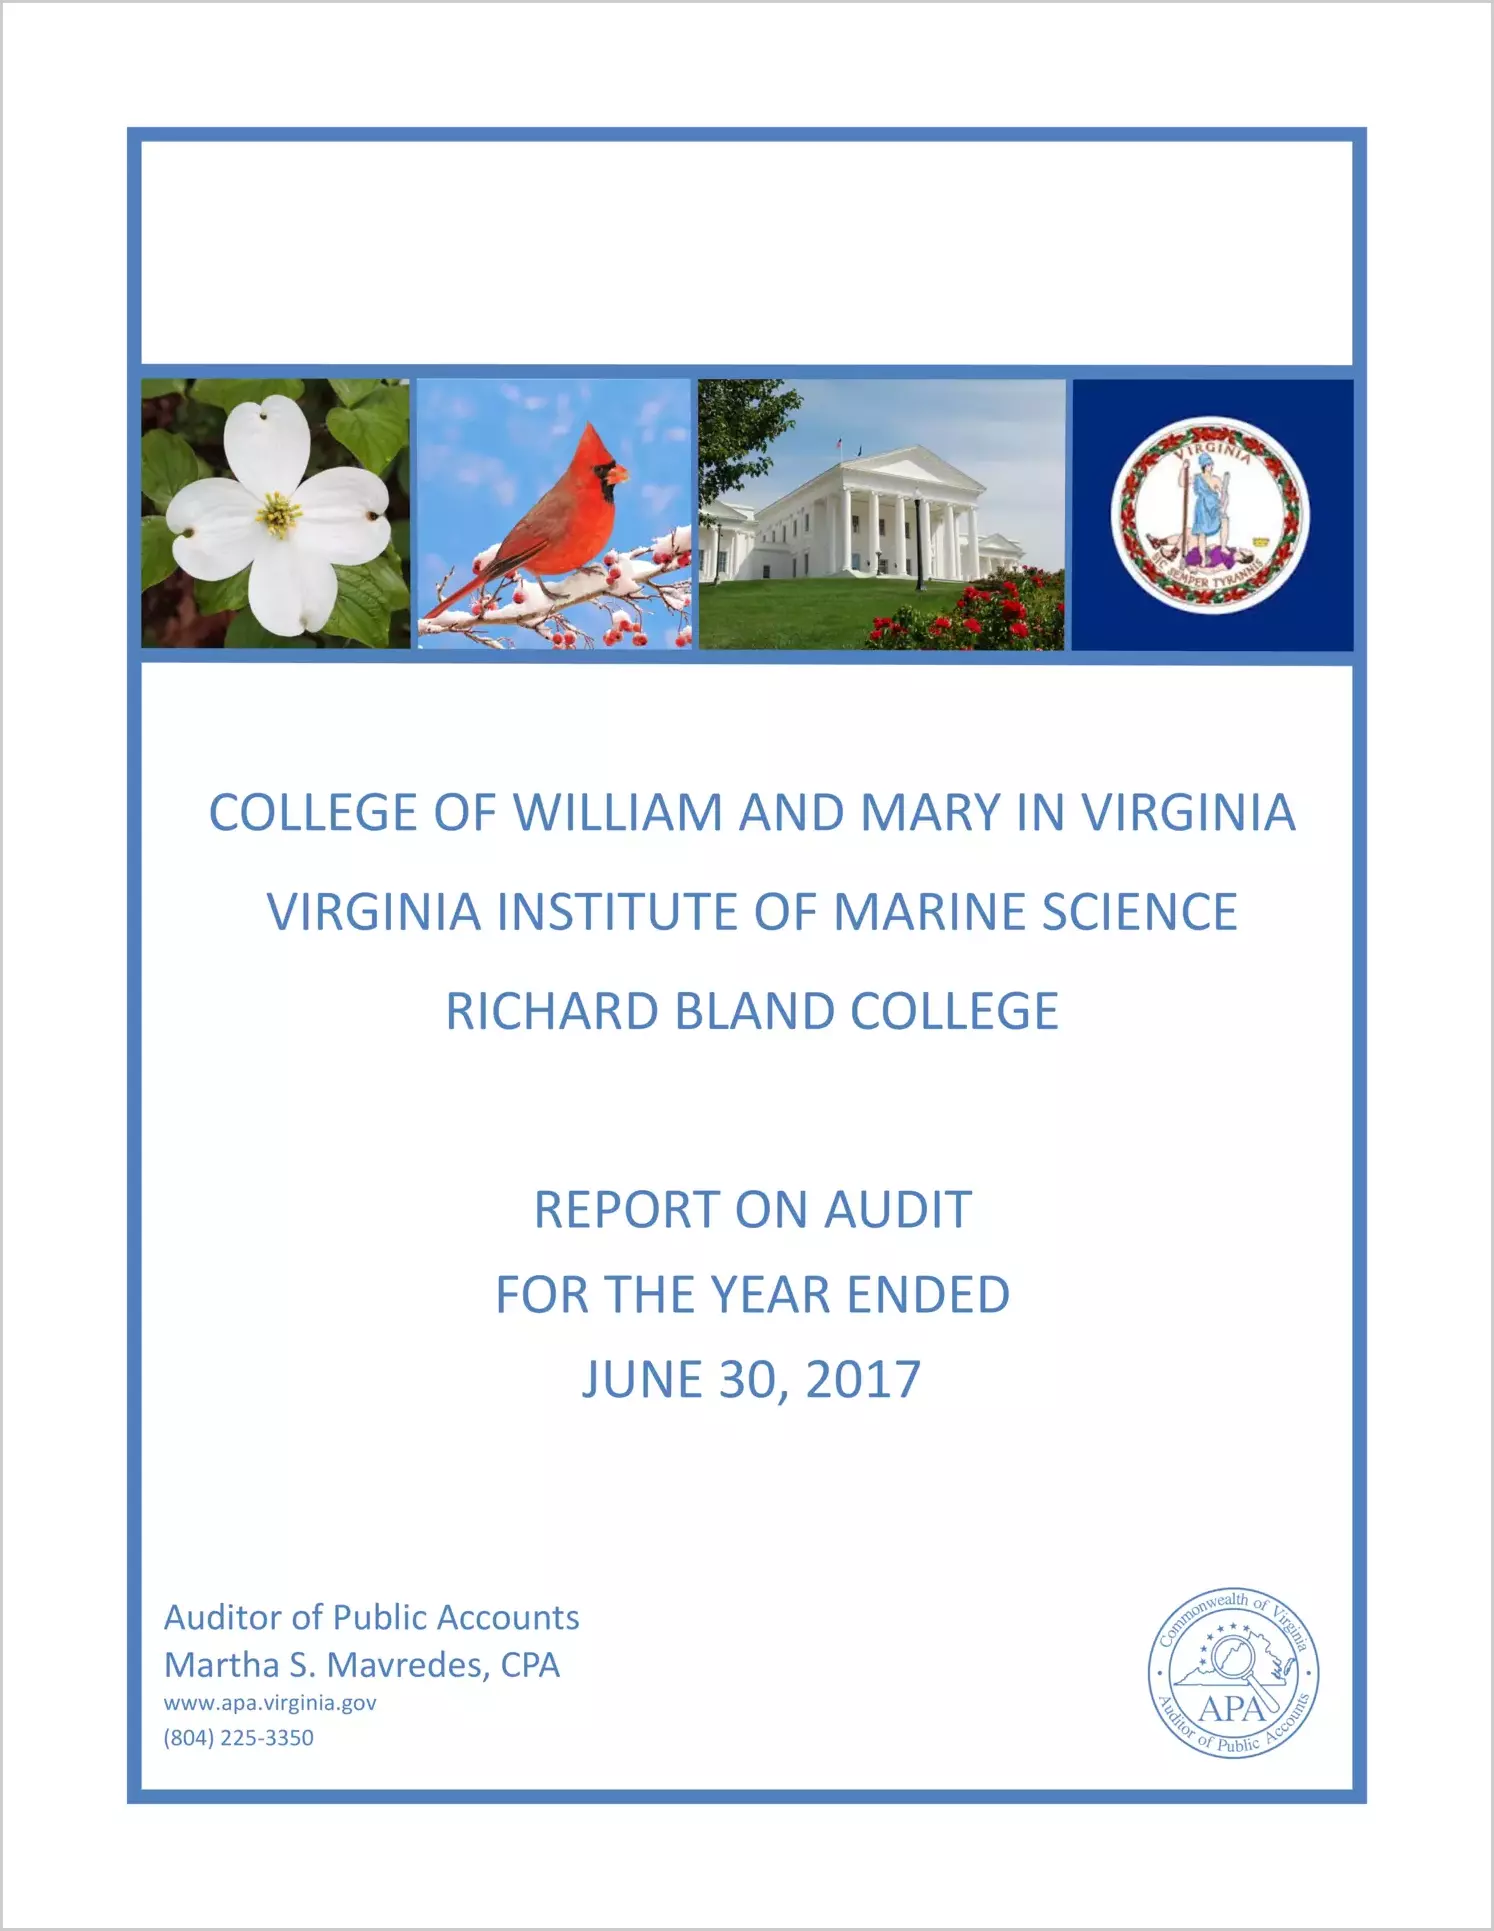 The College of William and Mary in Virginia, Virginia Institute of Marine Science, and Richard Bland College for the year ended June 30, 2017